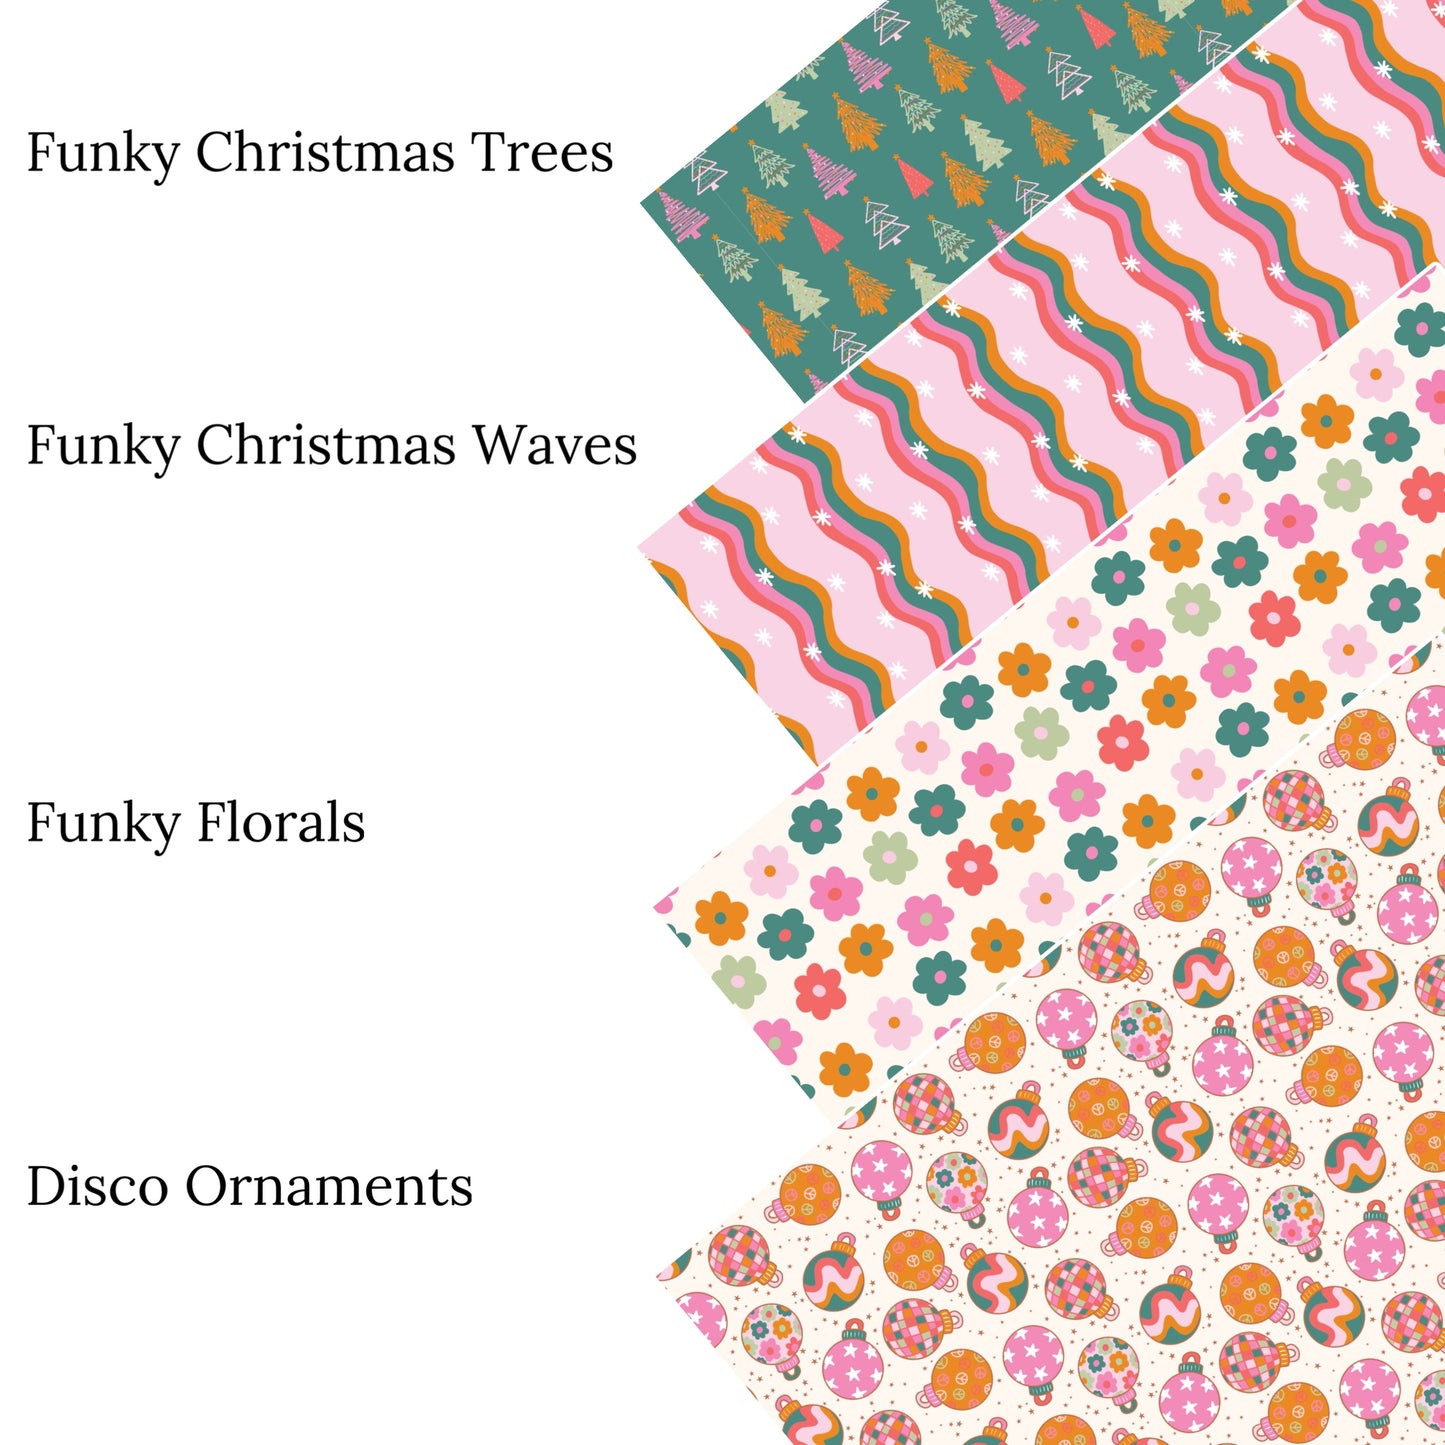 Disco Ornaments Faux Leather Sheets